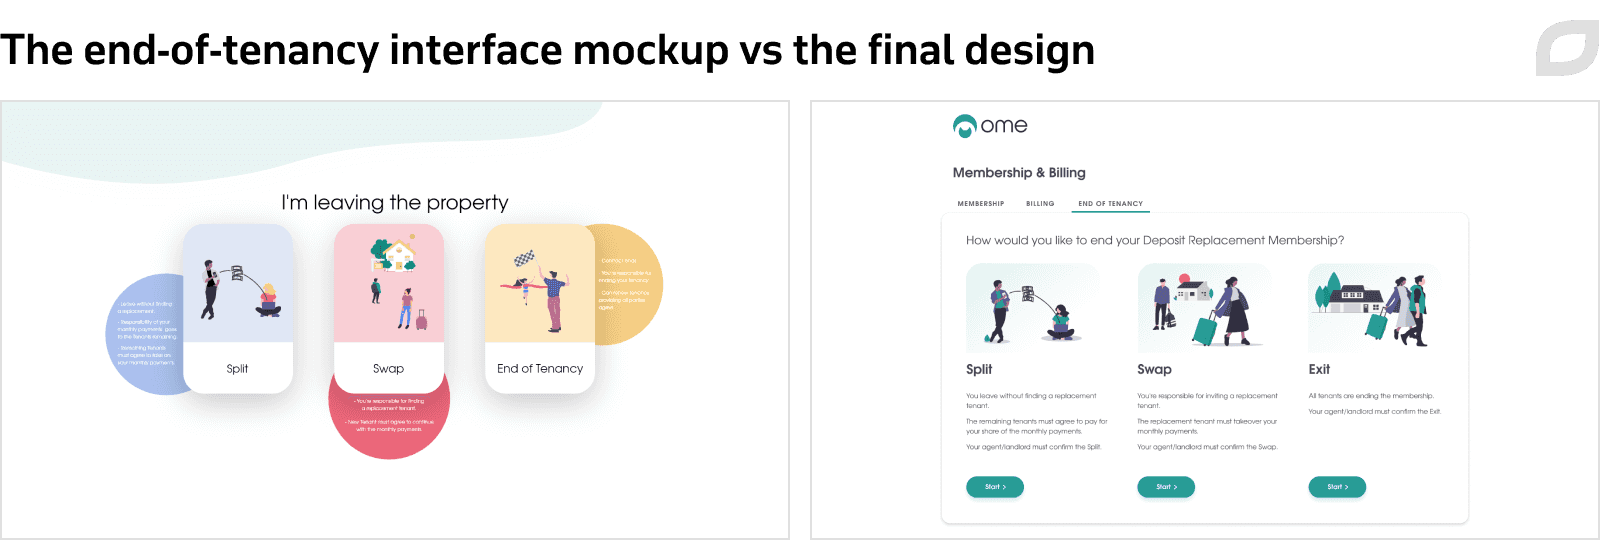 The end-of-tenancy interface mockup vs the final design